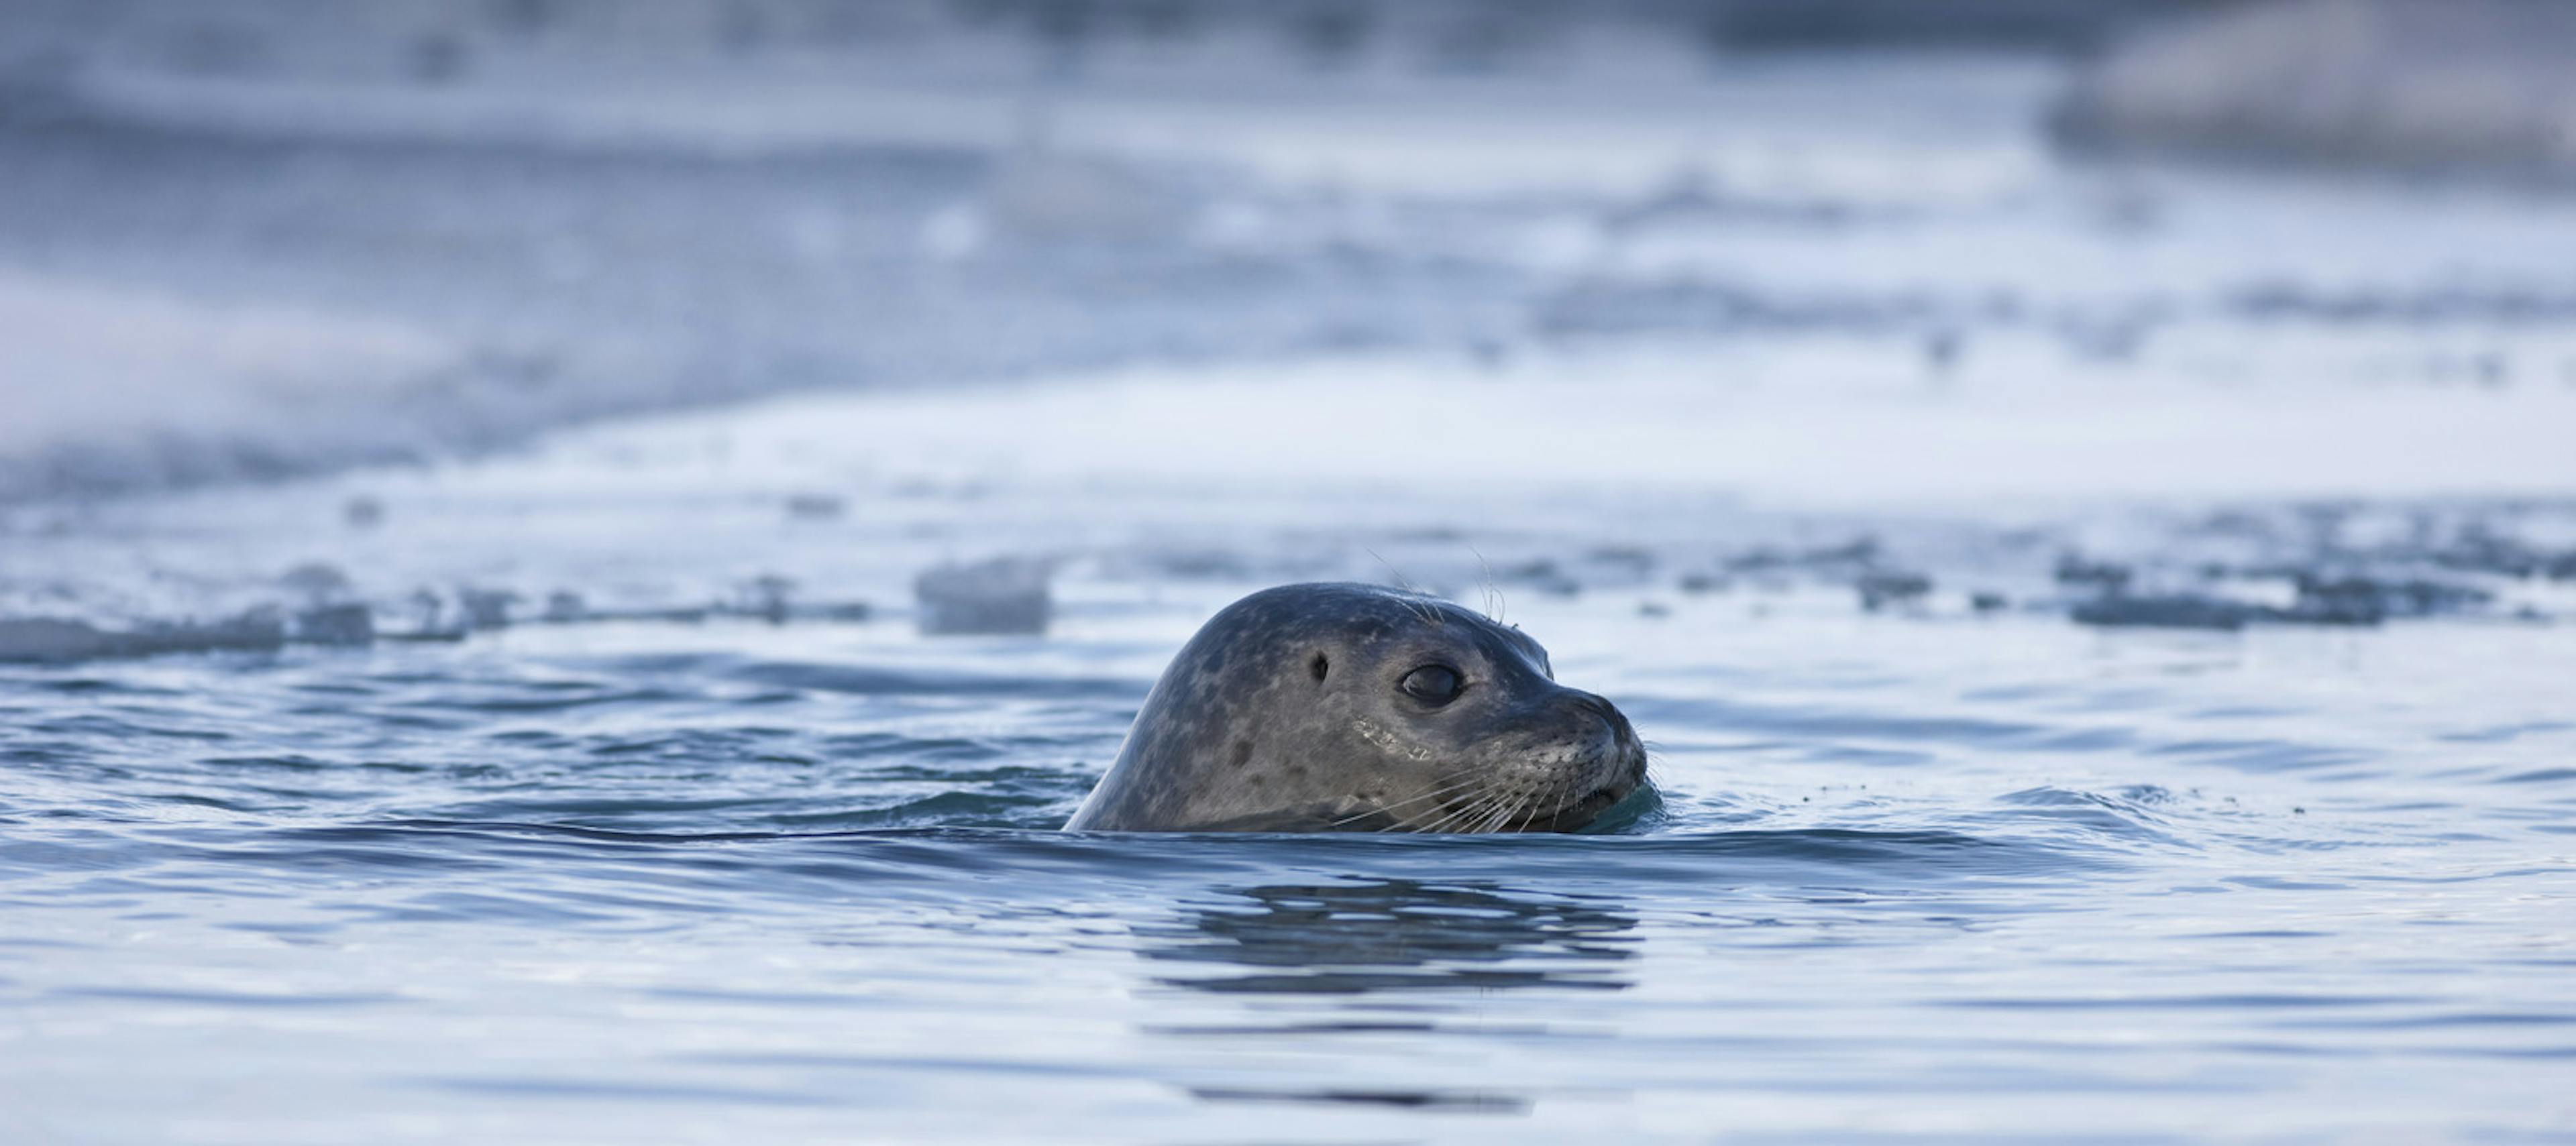 Seal poking its head out of water in Jökulsárlón